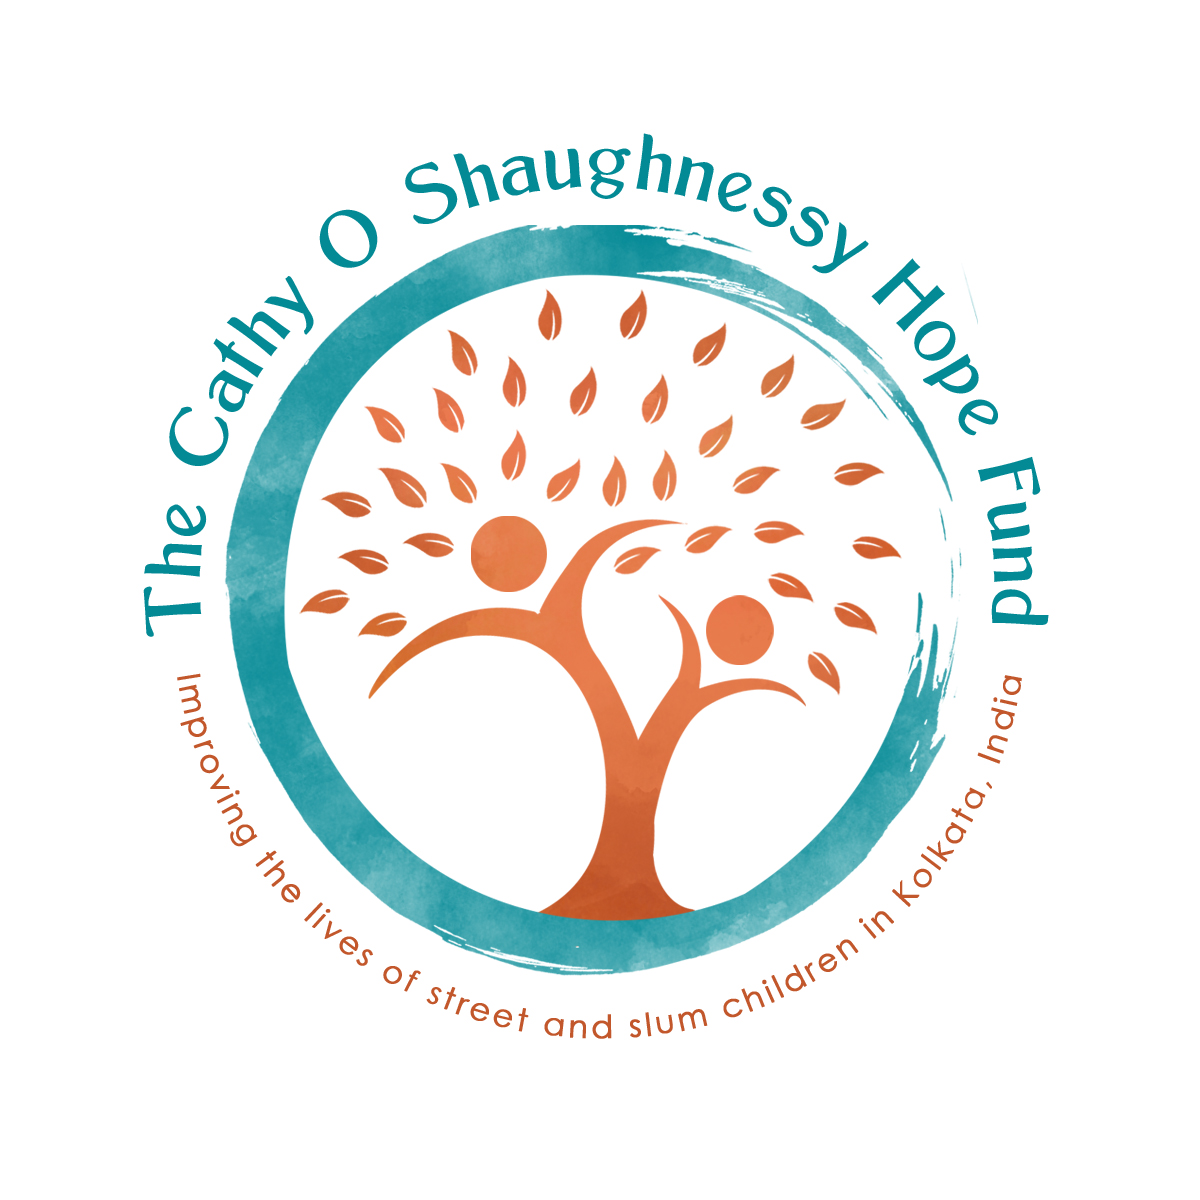 The Cathy O'Shaughnessy Hope Fund